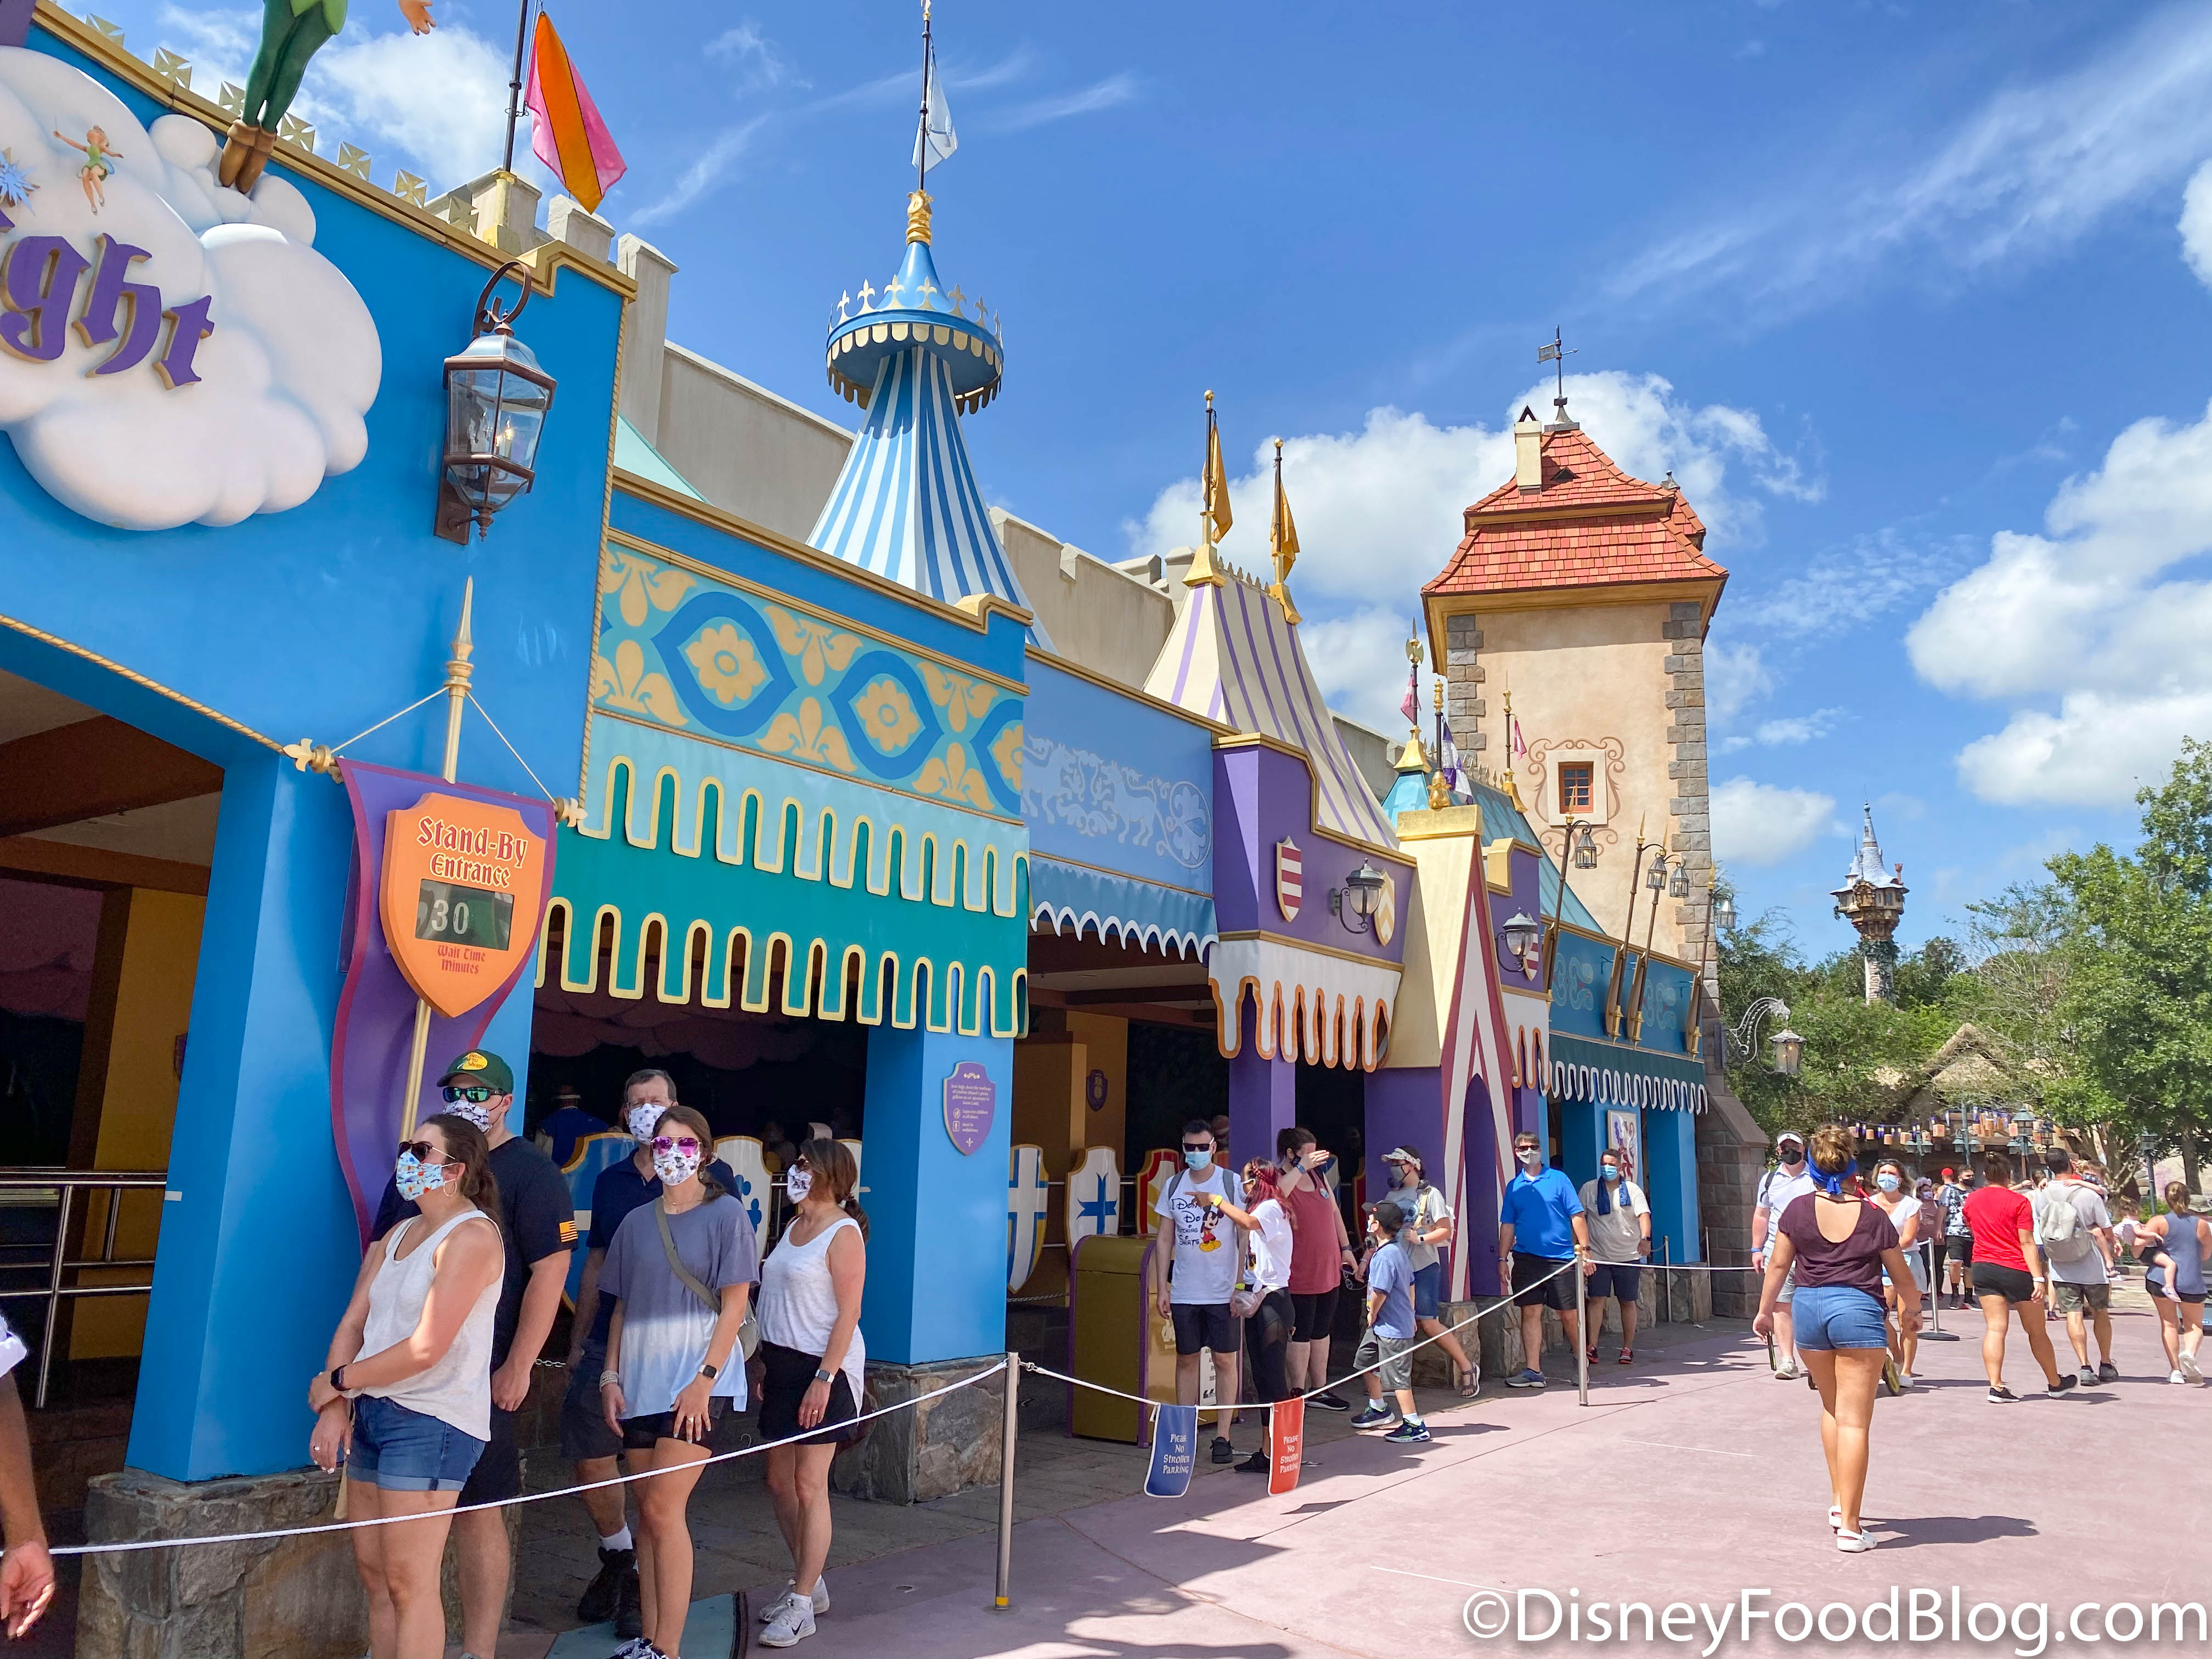 Photos and Videos! Check Out the Labor Day Crowds in Disney World Today